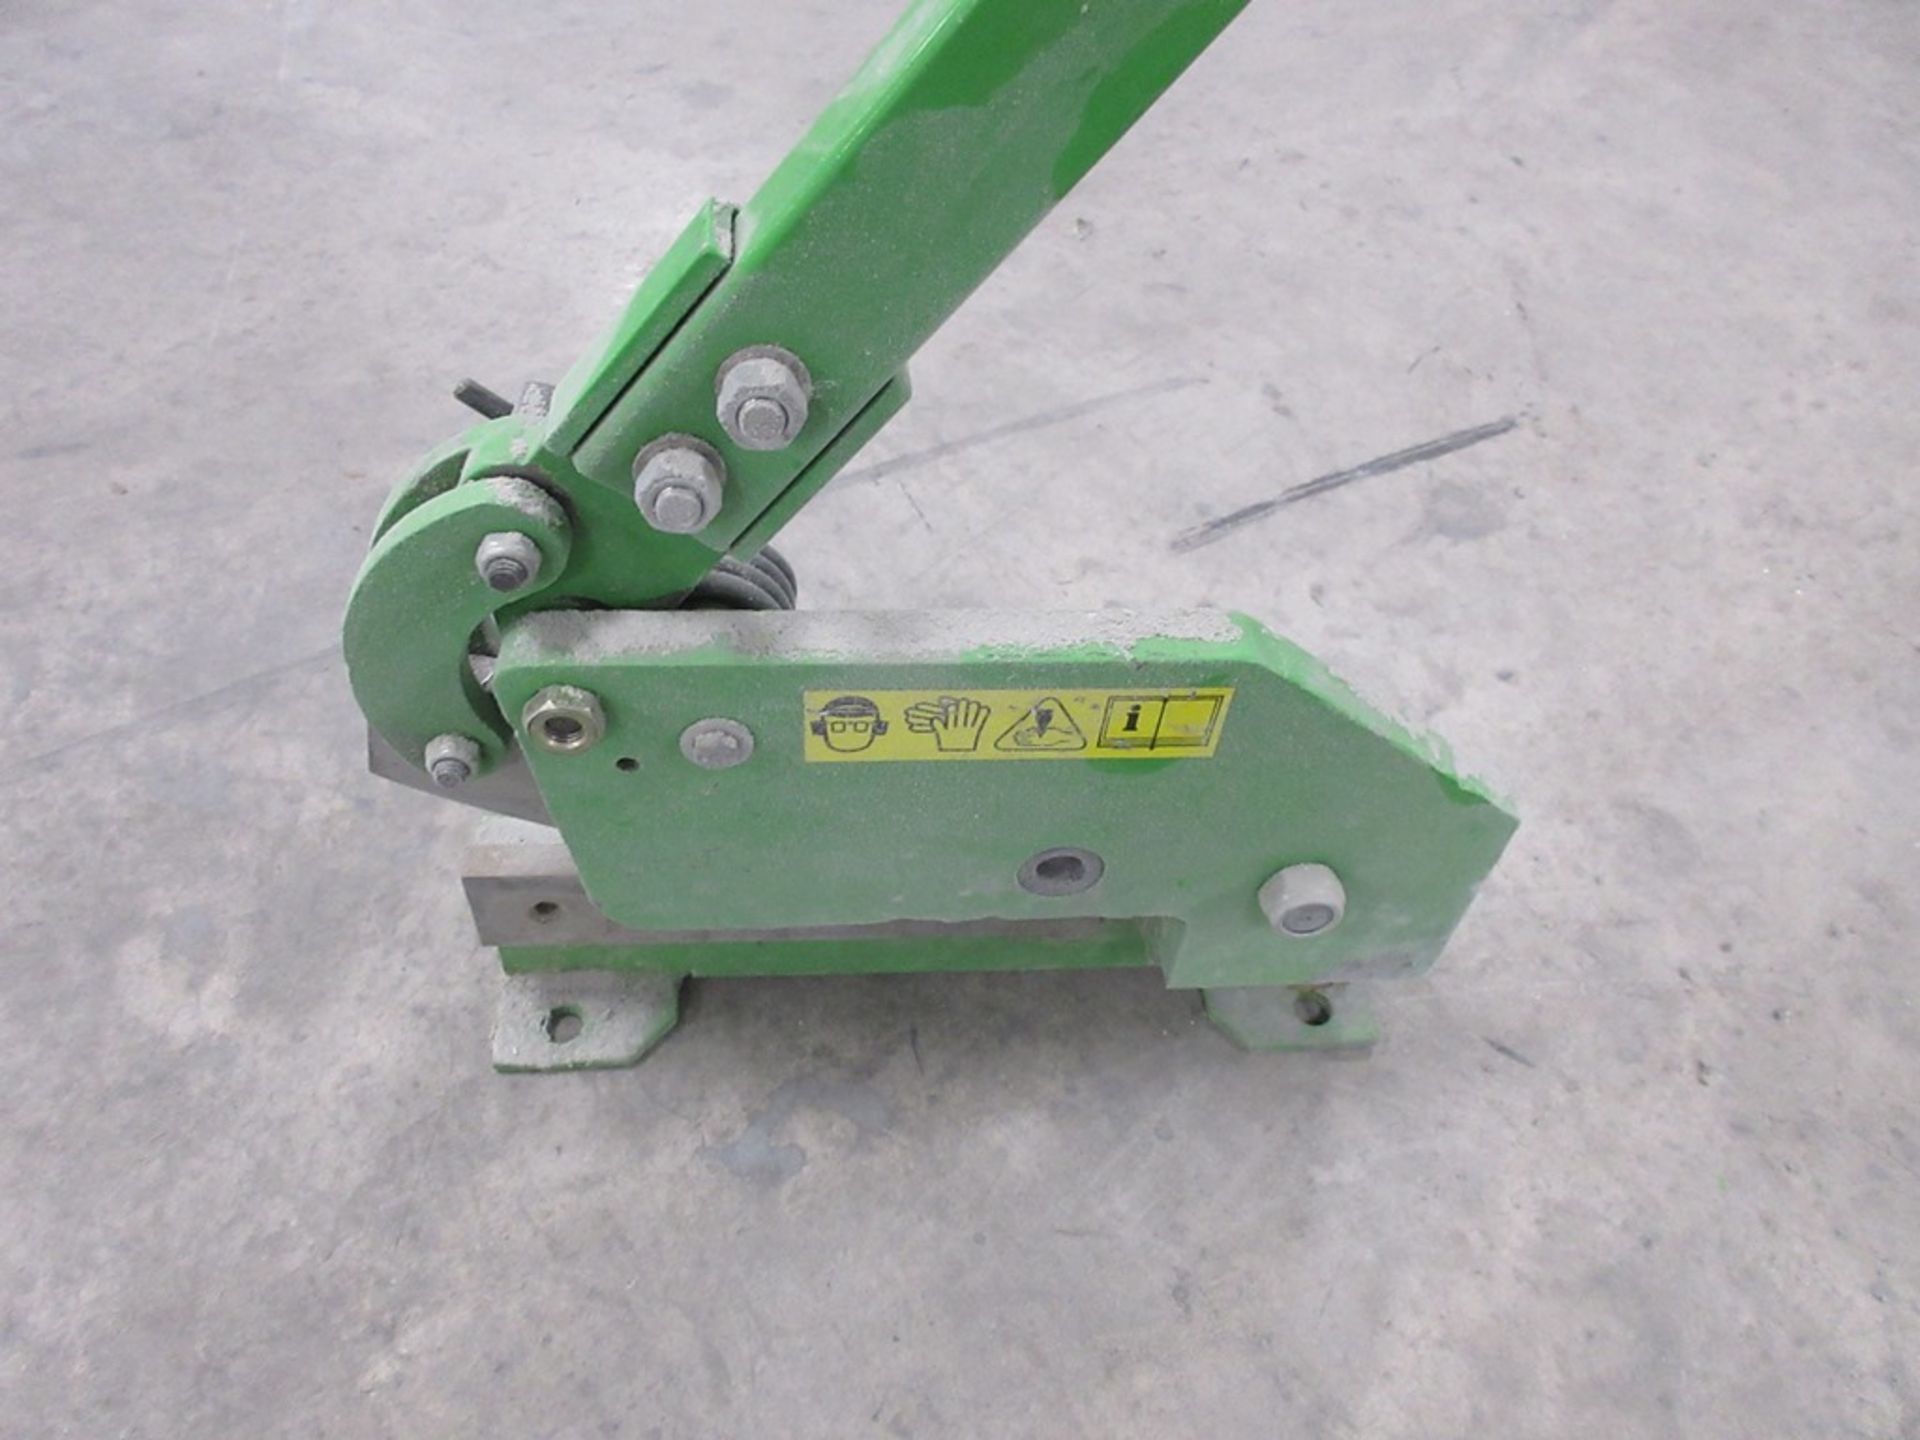 Bench mounted manual cropper - Image 2 of 3